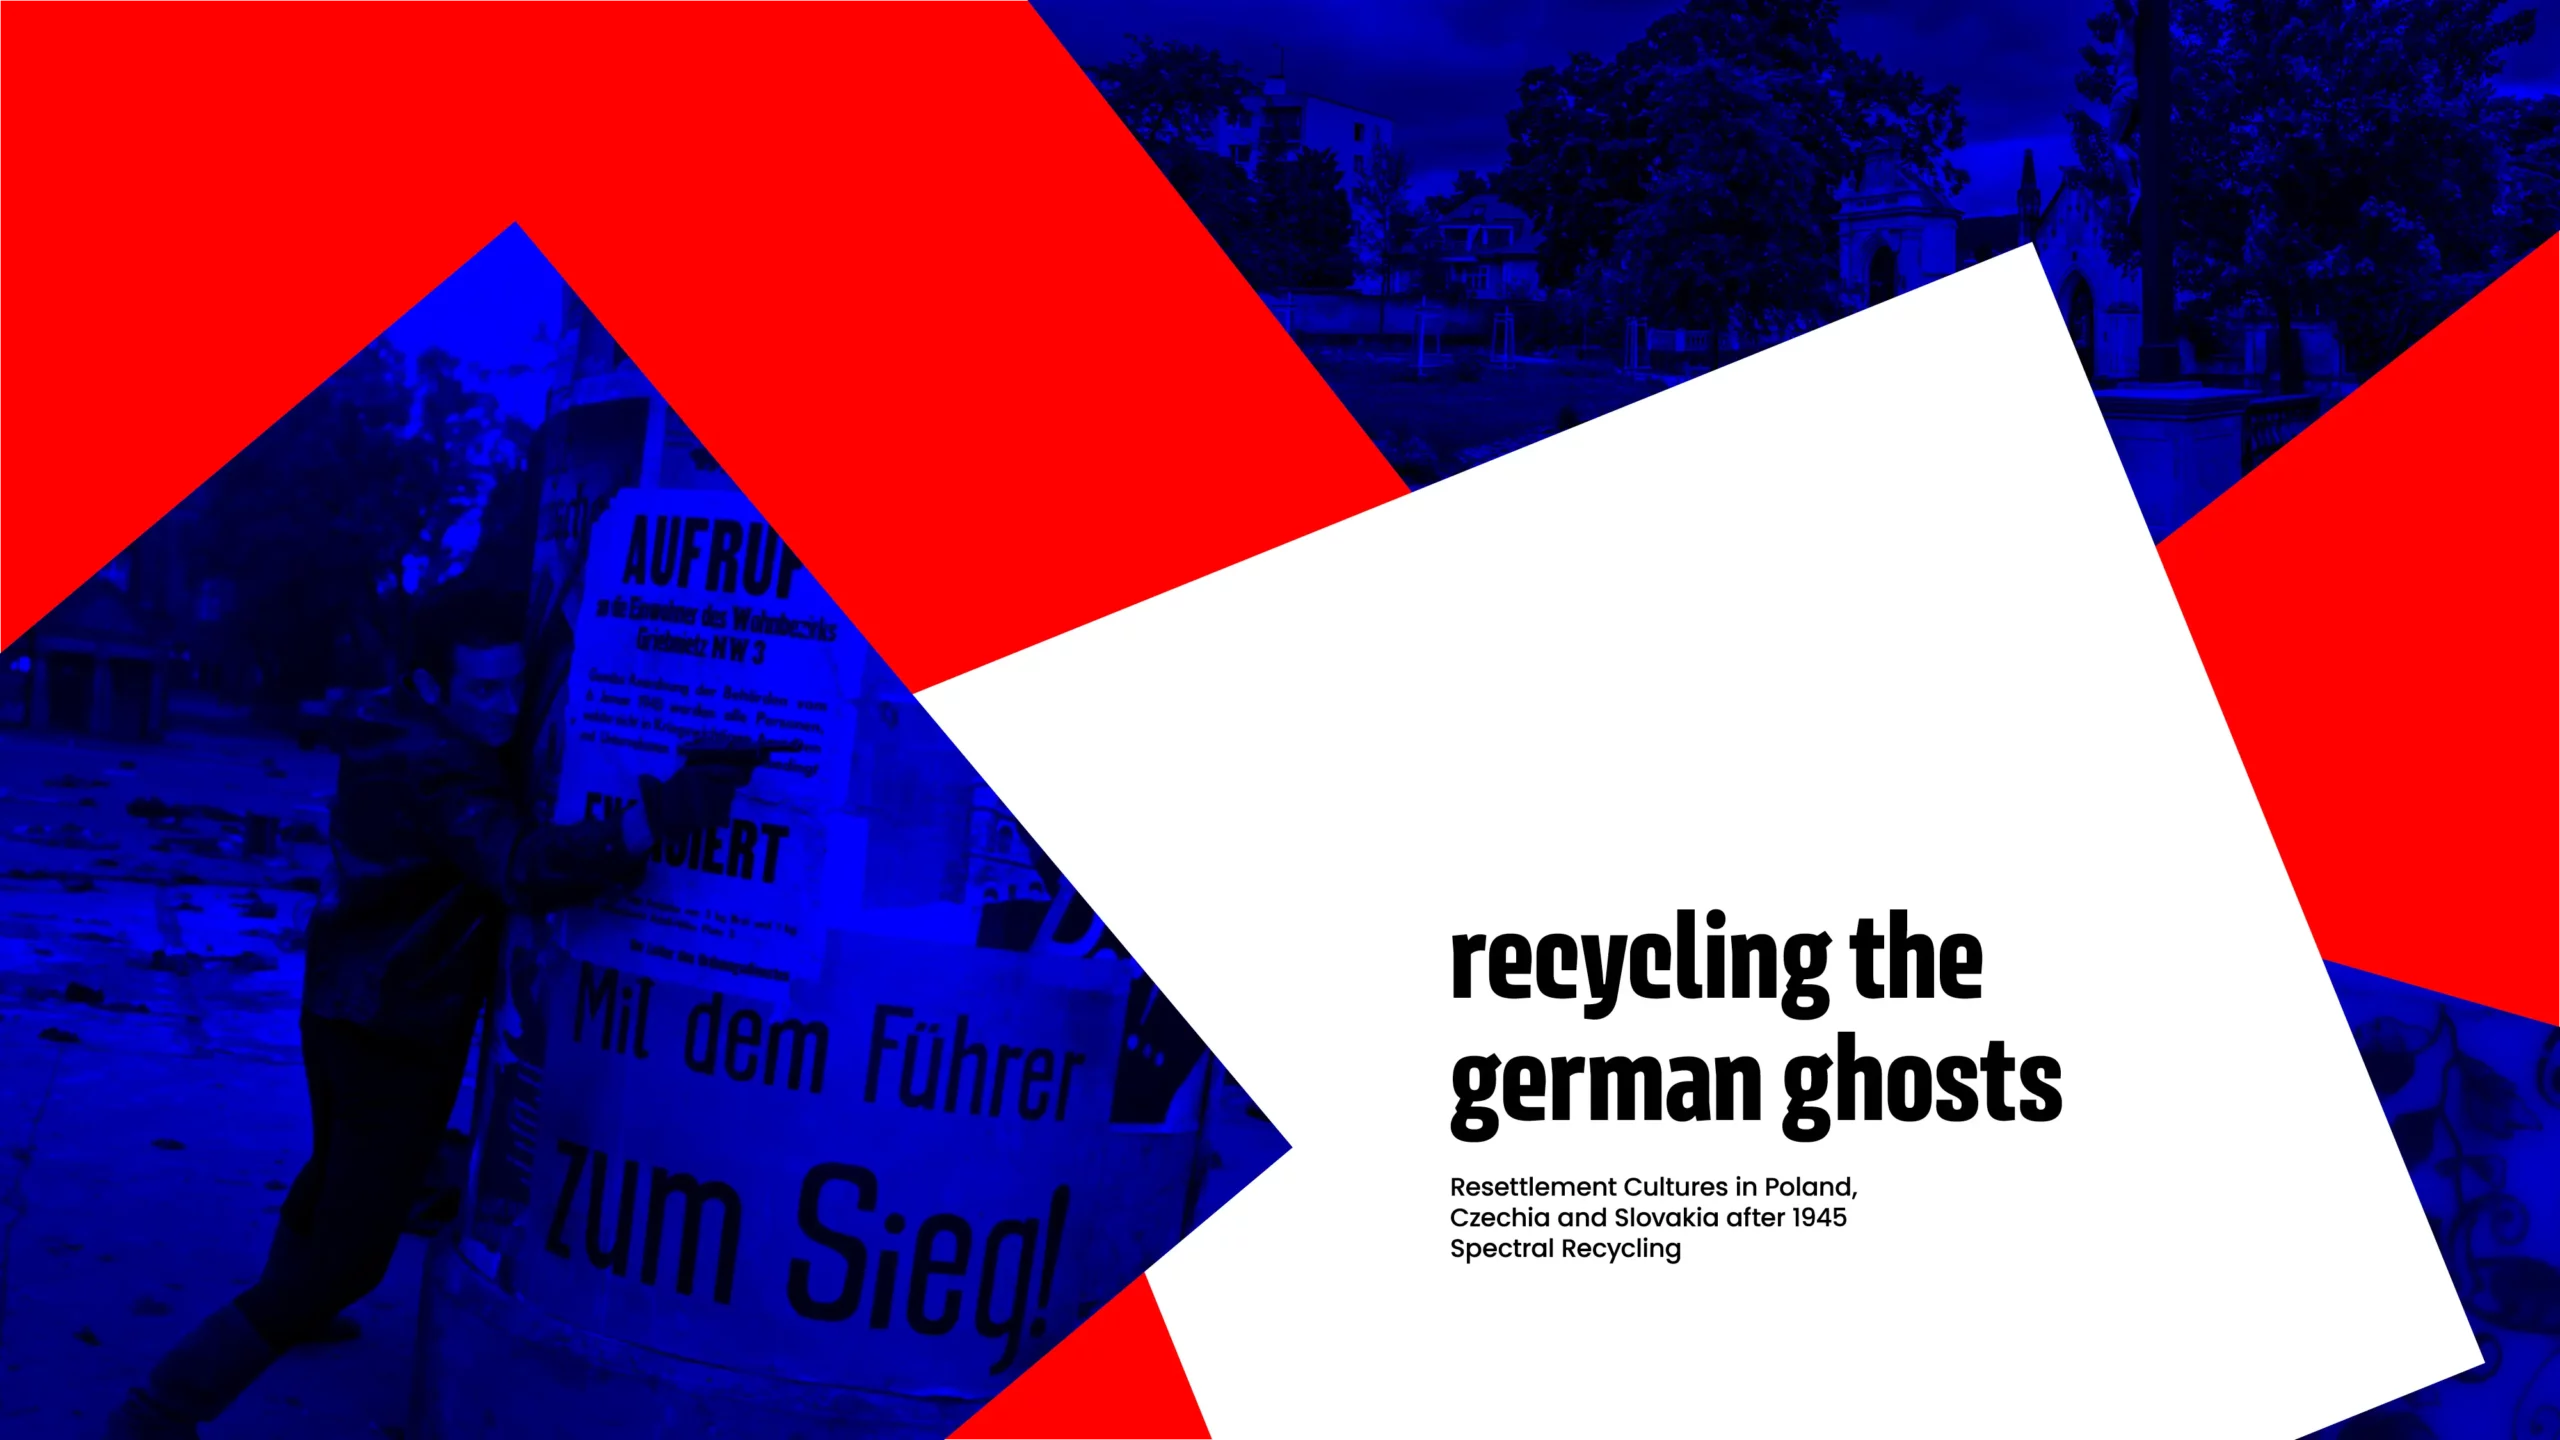 Recycling the german ghosts